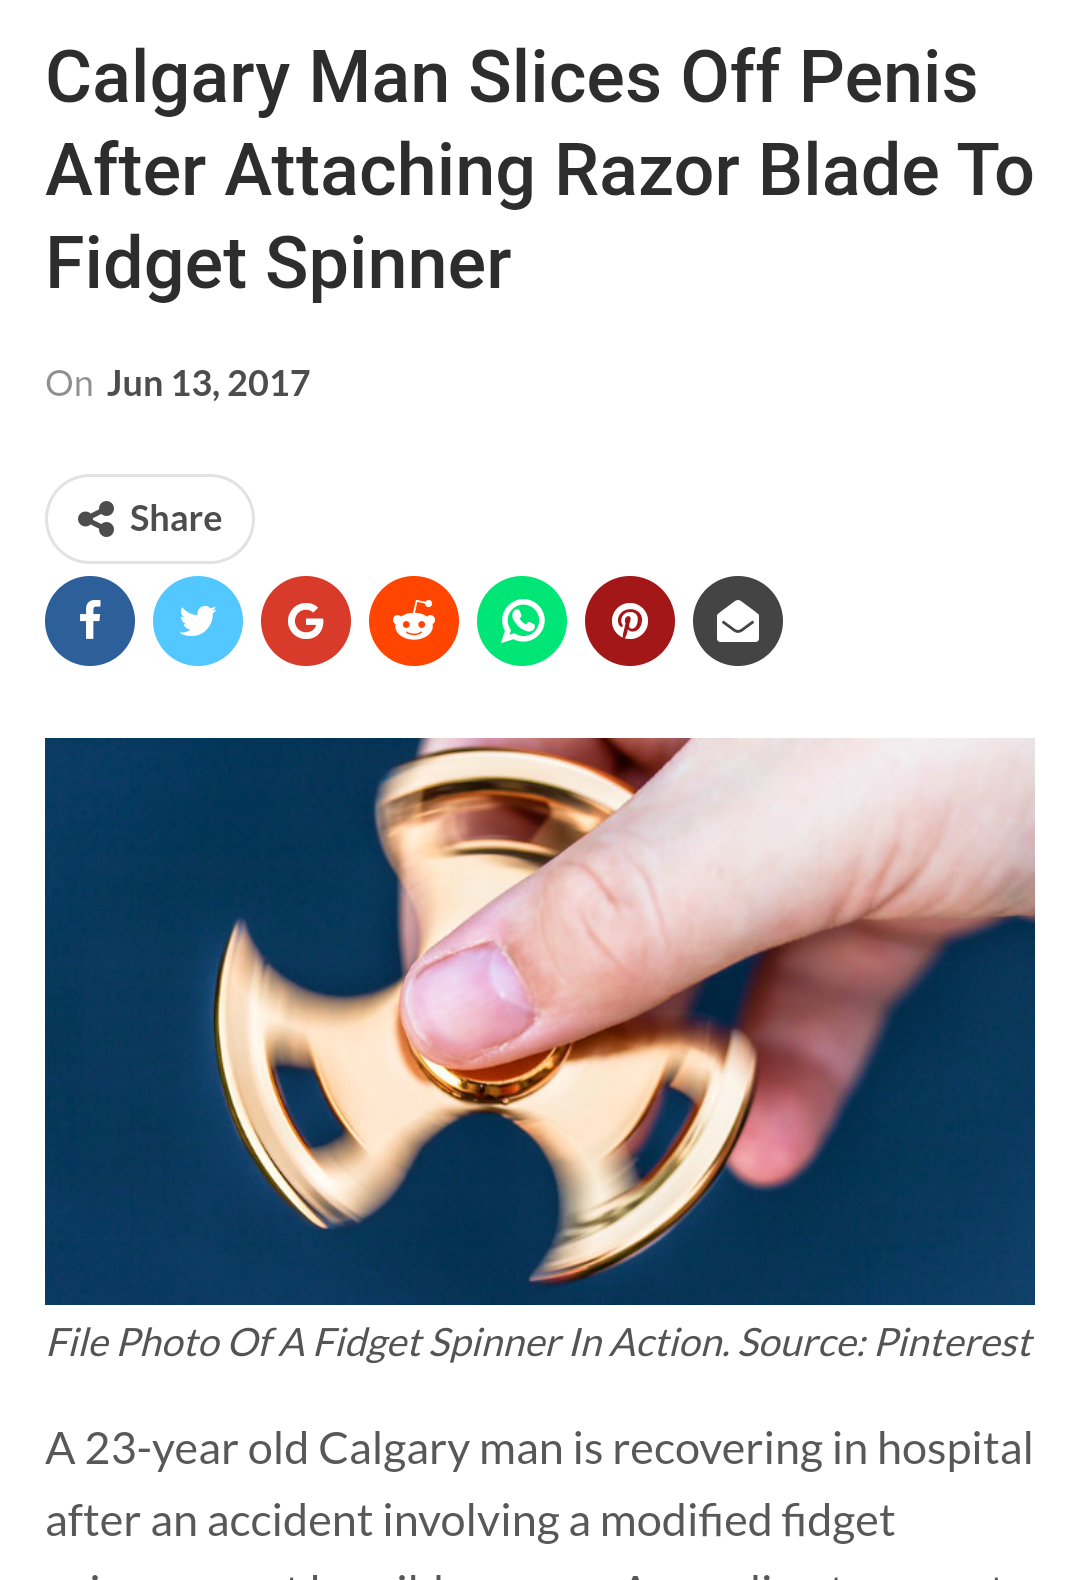 file photo of a fidget spinner in action, slicing off a penis